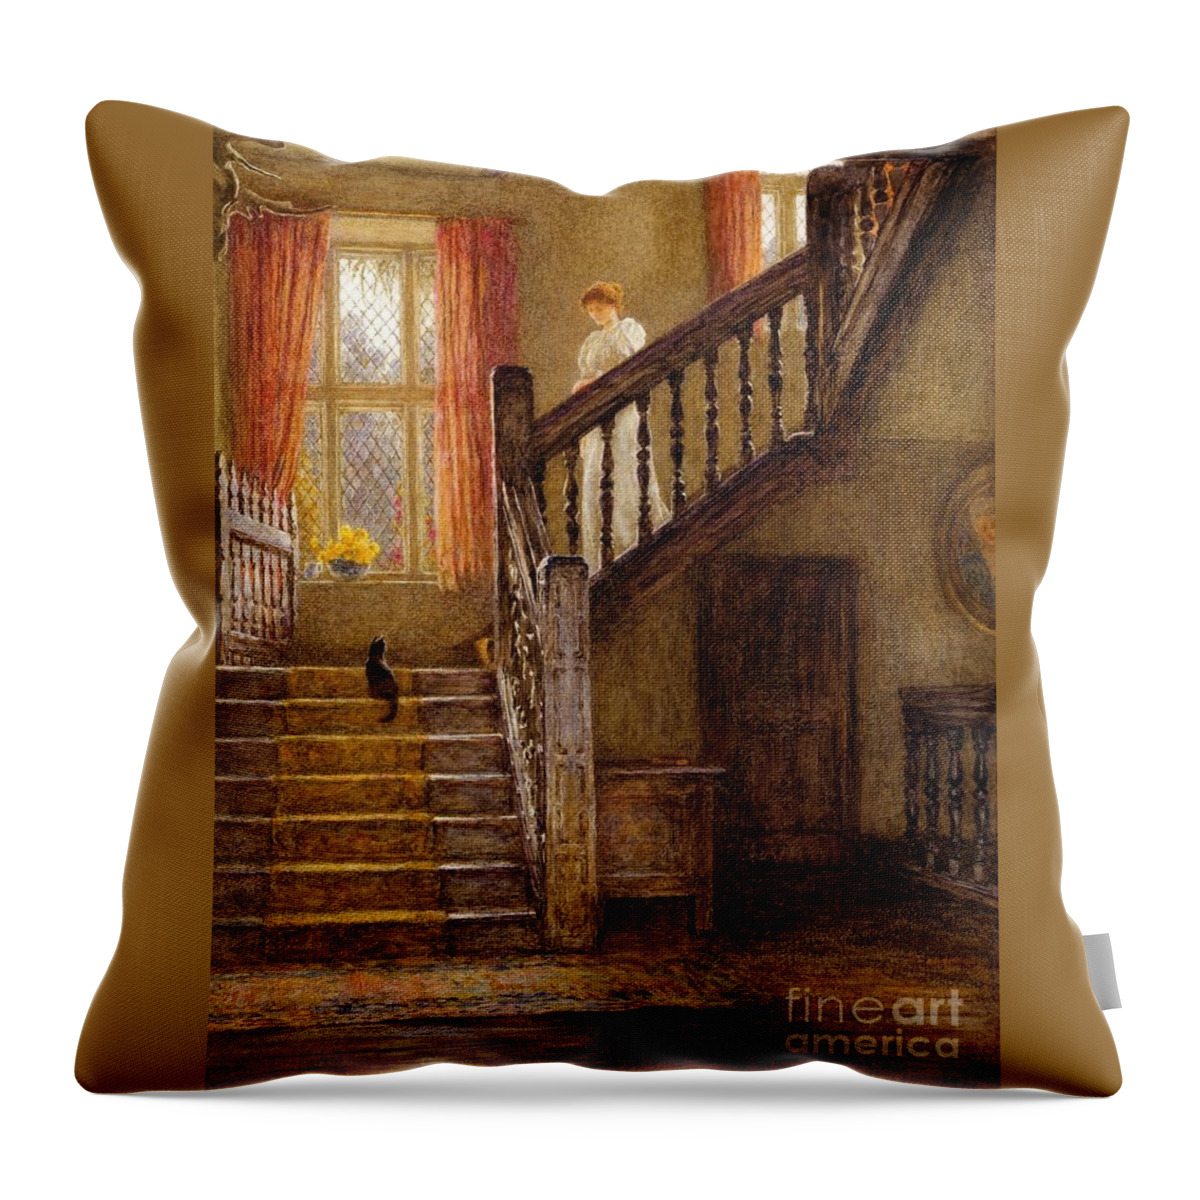 Helen Allingham - The Staircase Throw Pillow featuring the painting The Staircase Whittington Court by Helen Allingham